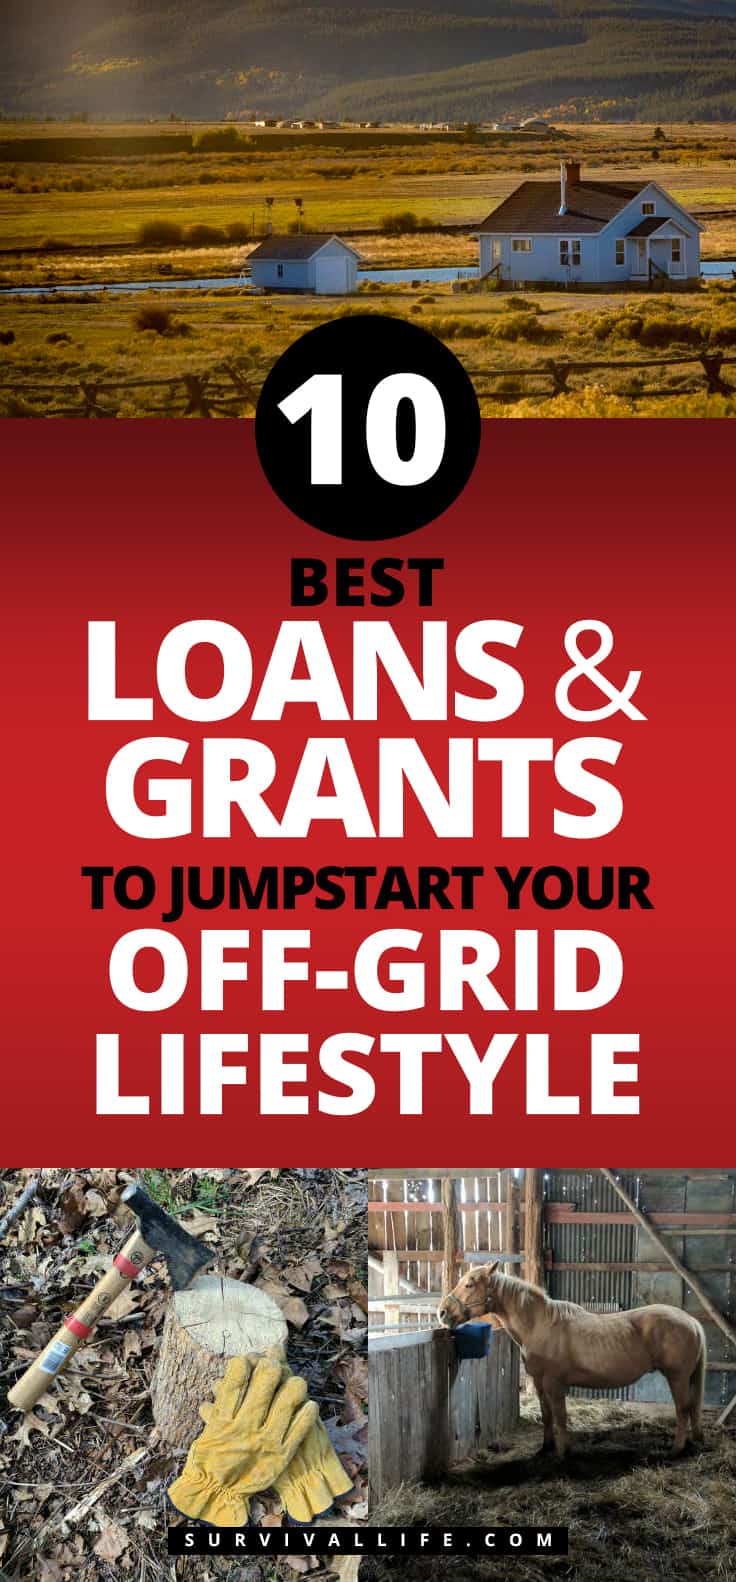 Best Loans And Grants To Jumpstart Your Off-Grid Lifestyle | https://survivallife.com/loans-grants-preppers-homesteaders/